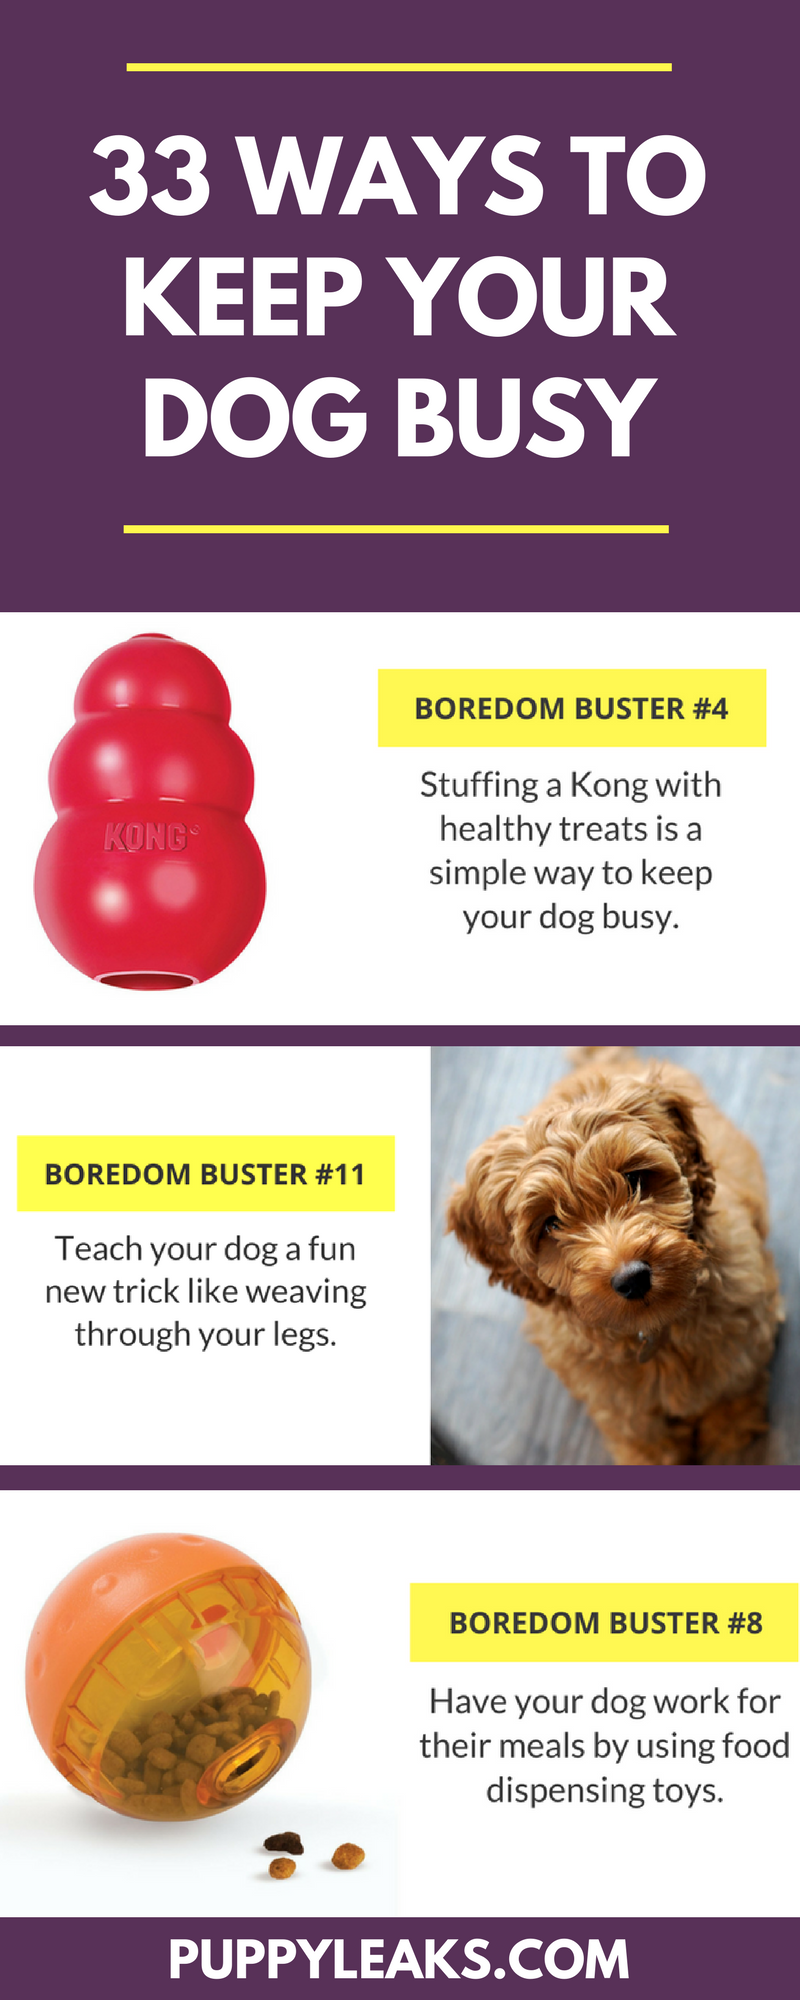 7 Ways to Keep Your Dog Busy While at Home